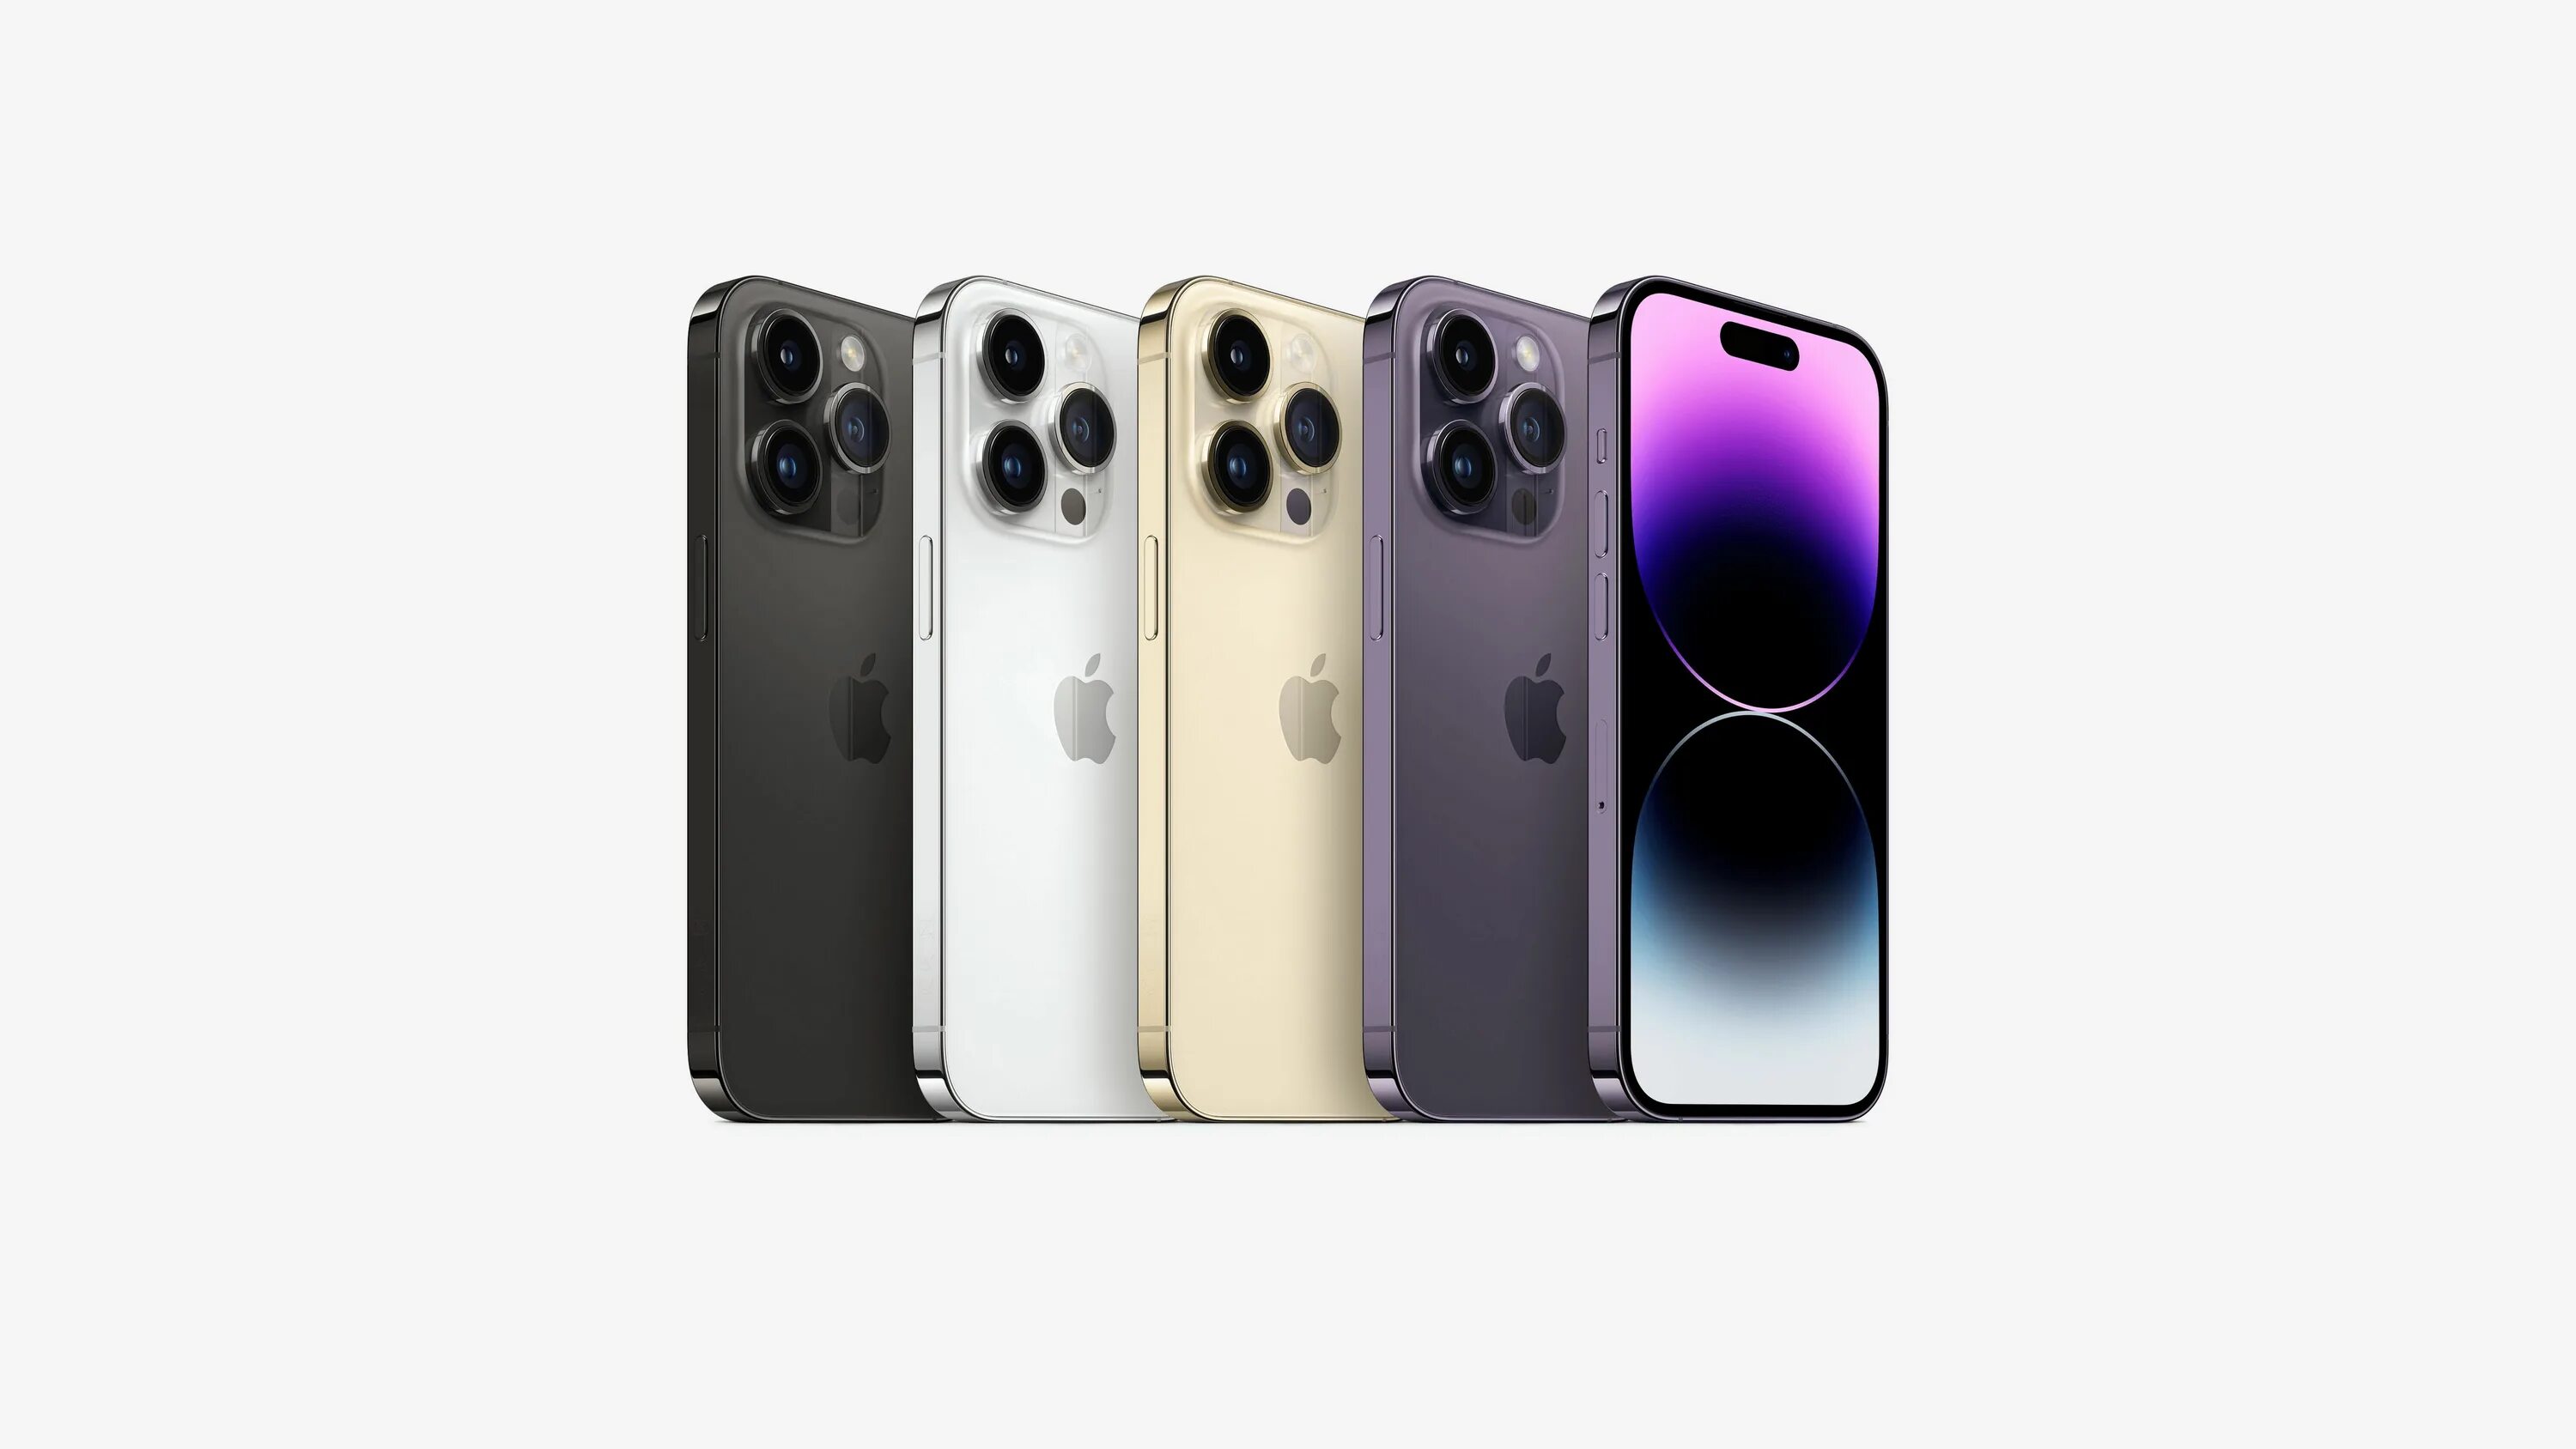 Iphone 14 Pro Max. Iphone 14 Pro Max 2022. Iphone 11 Pro Max 256gb. Iphone 14 Pro Max Gold.